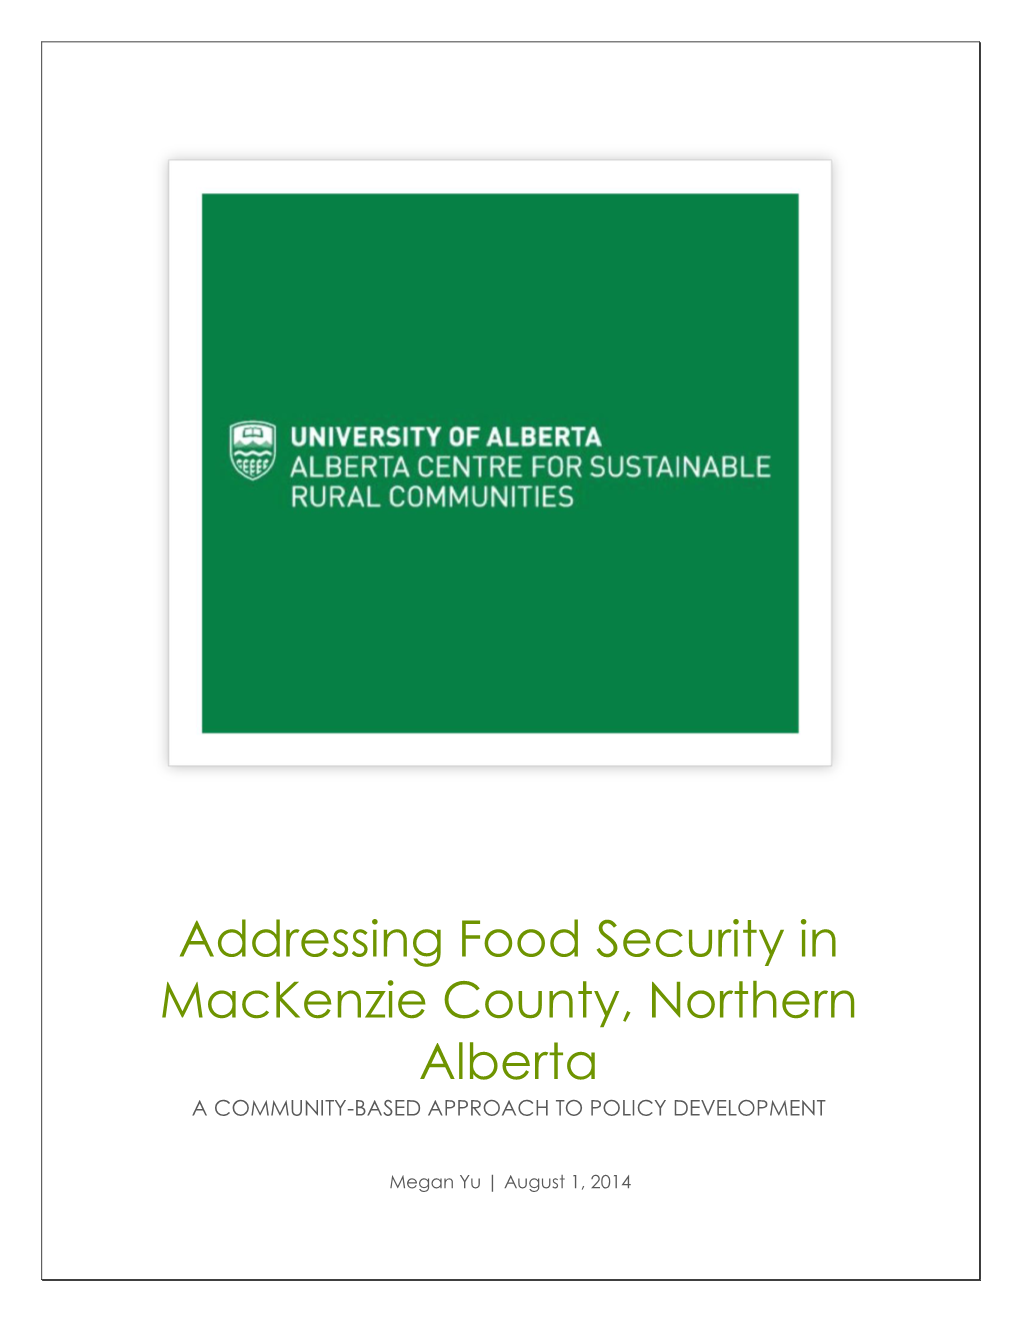 Addressing Food Security in Mackenzie County, Northern Alberta a COMMUNITY-BASED APPROACH to POLICY DEVELOPMENT